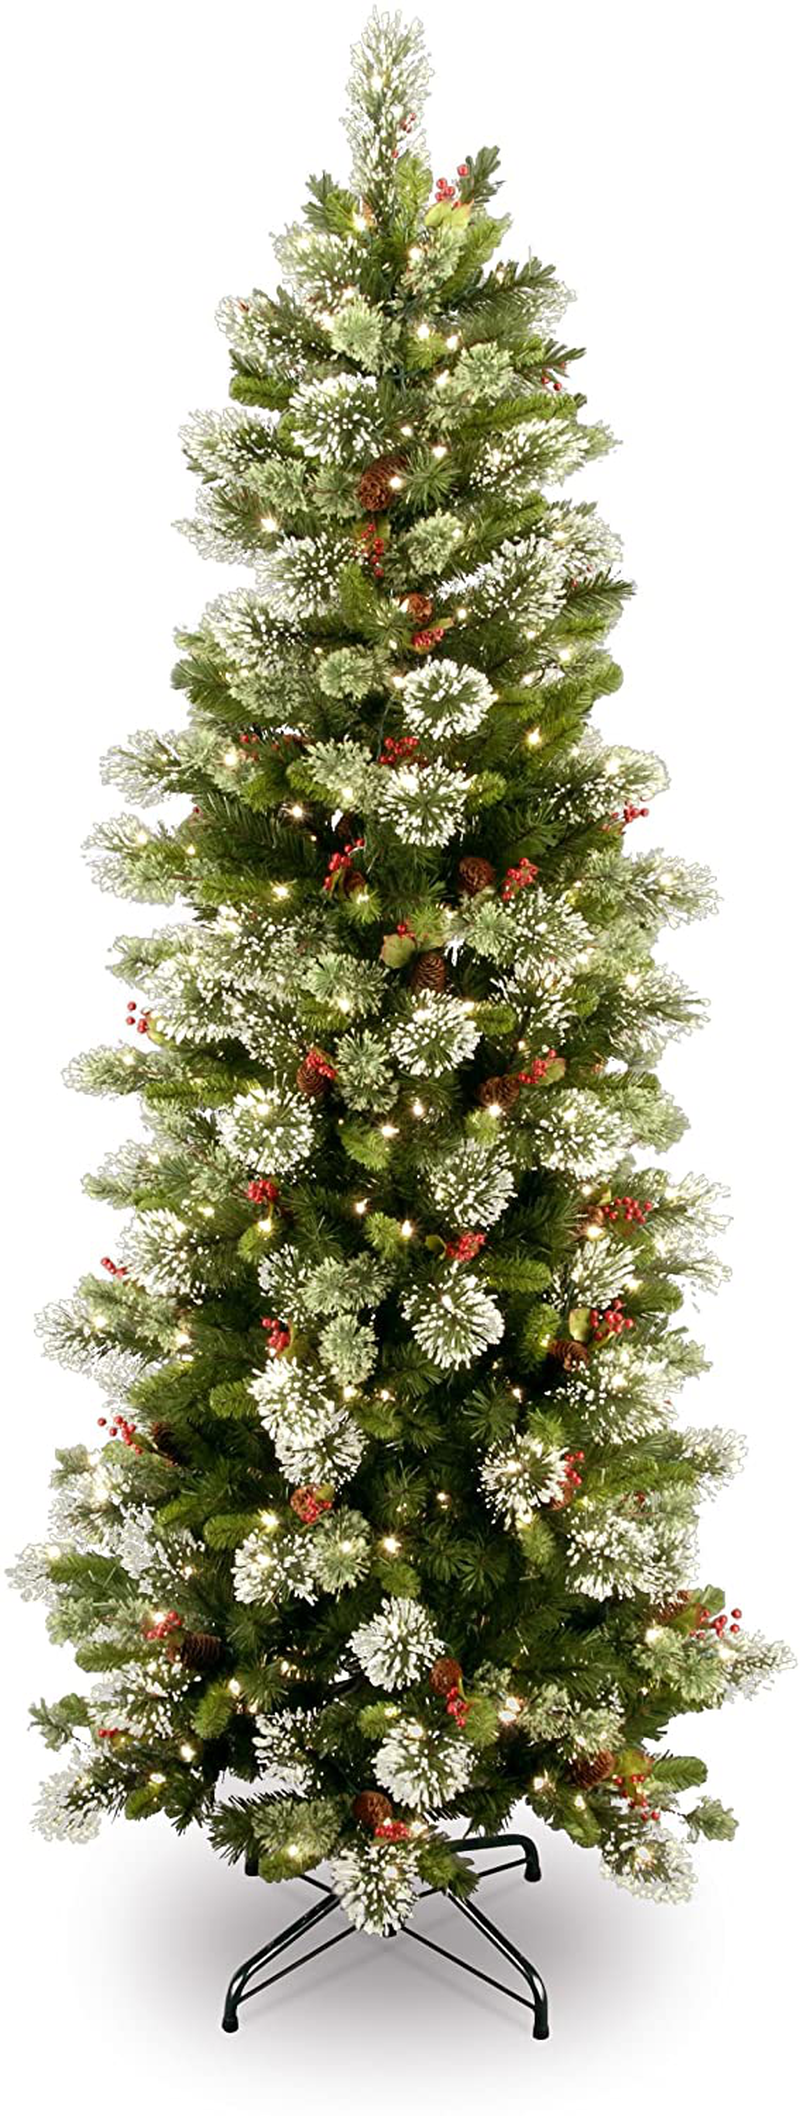 National Tree Company Pre-lit Artificial Christmas Tree | Includes Pre-strung White Lights and Stand | Flocked with Cones, Red Berries and Snowflakes | Wintry Pine Slim - 7.5 ft